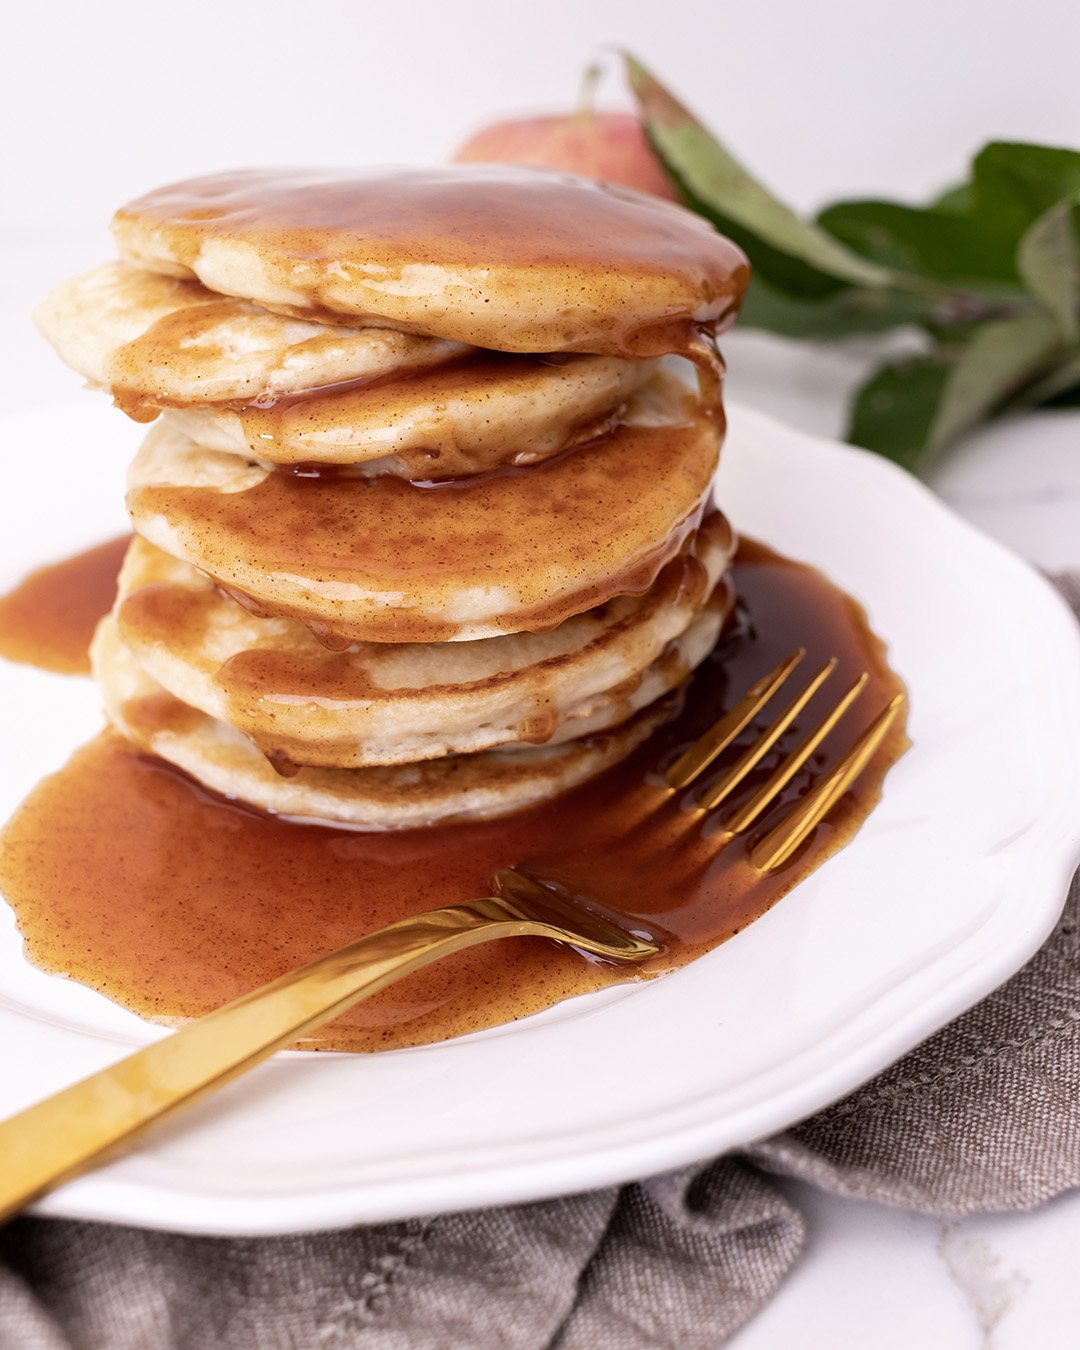 A stack of pancakes smothered in syrup.